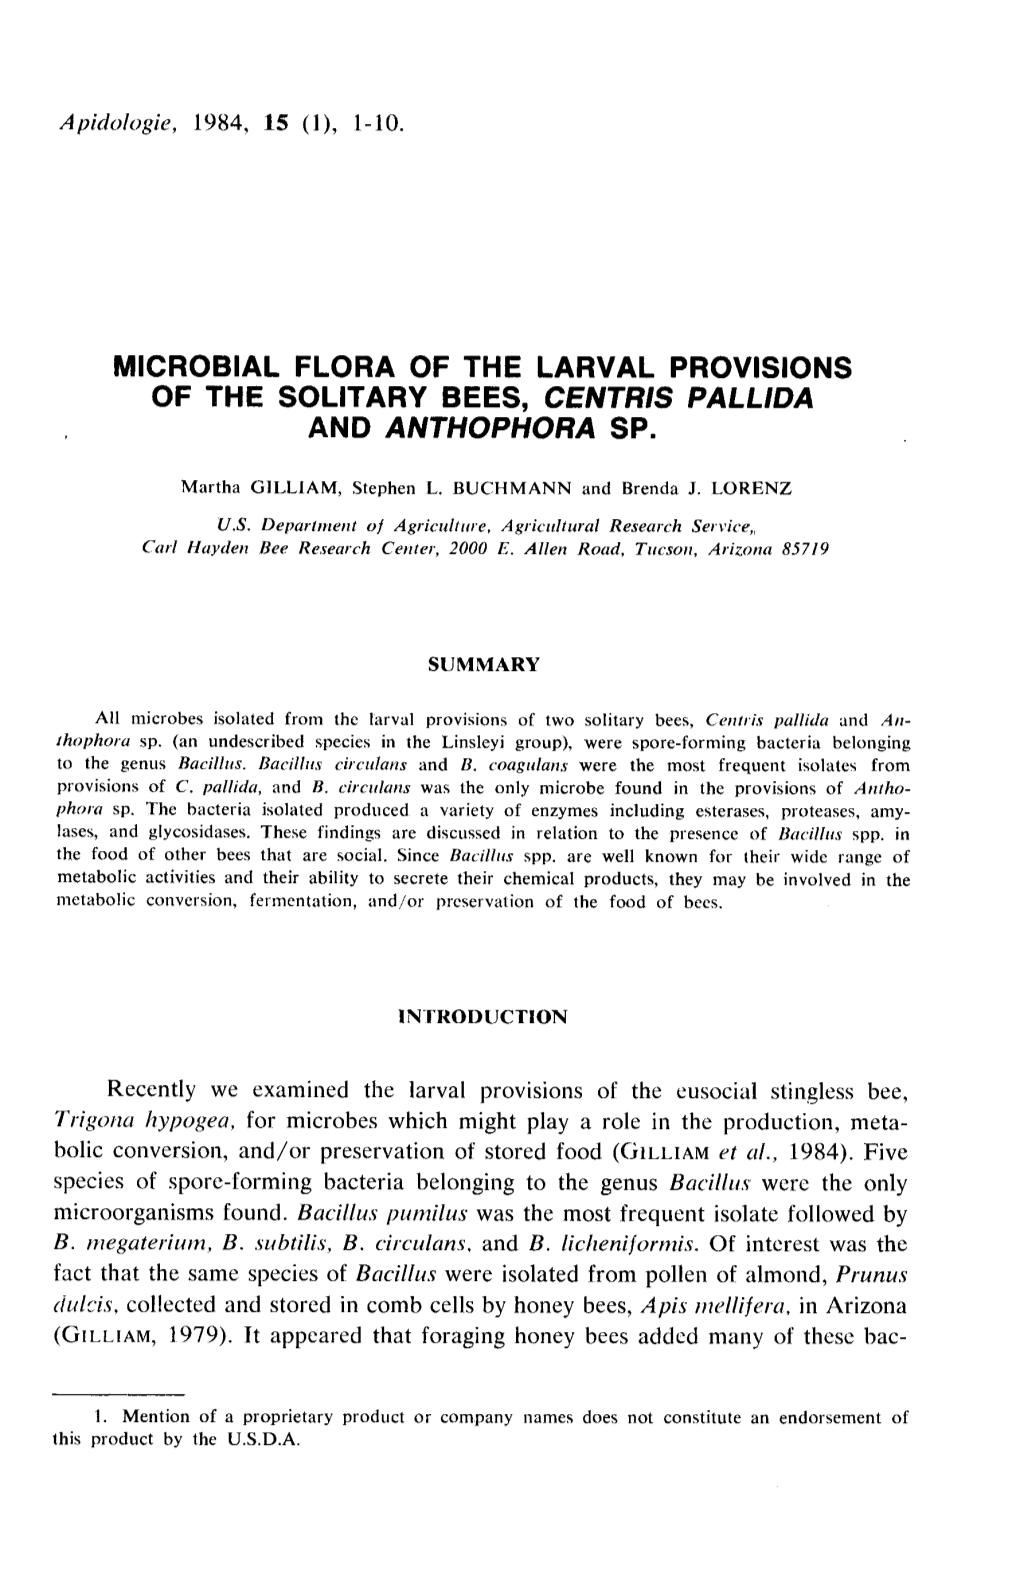 Microbial Flora of the Larval Provisions of the Solitary Bees, Centris Pallida and Anthophora Sp